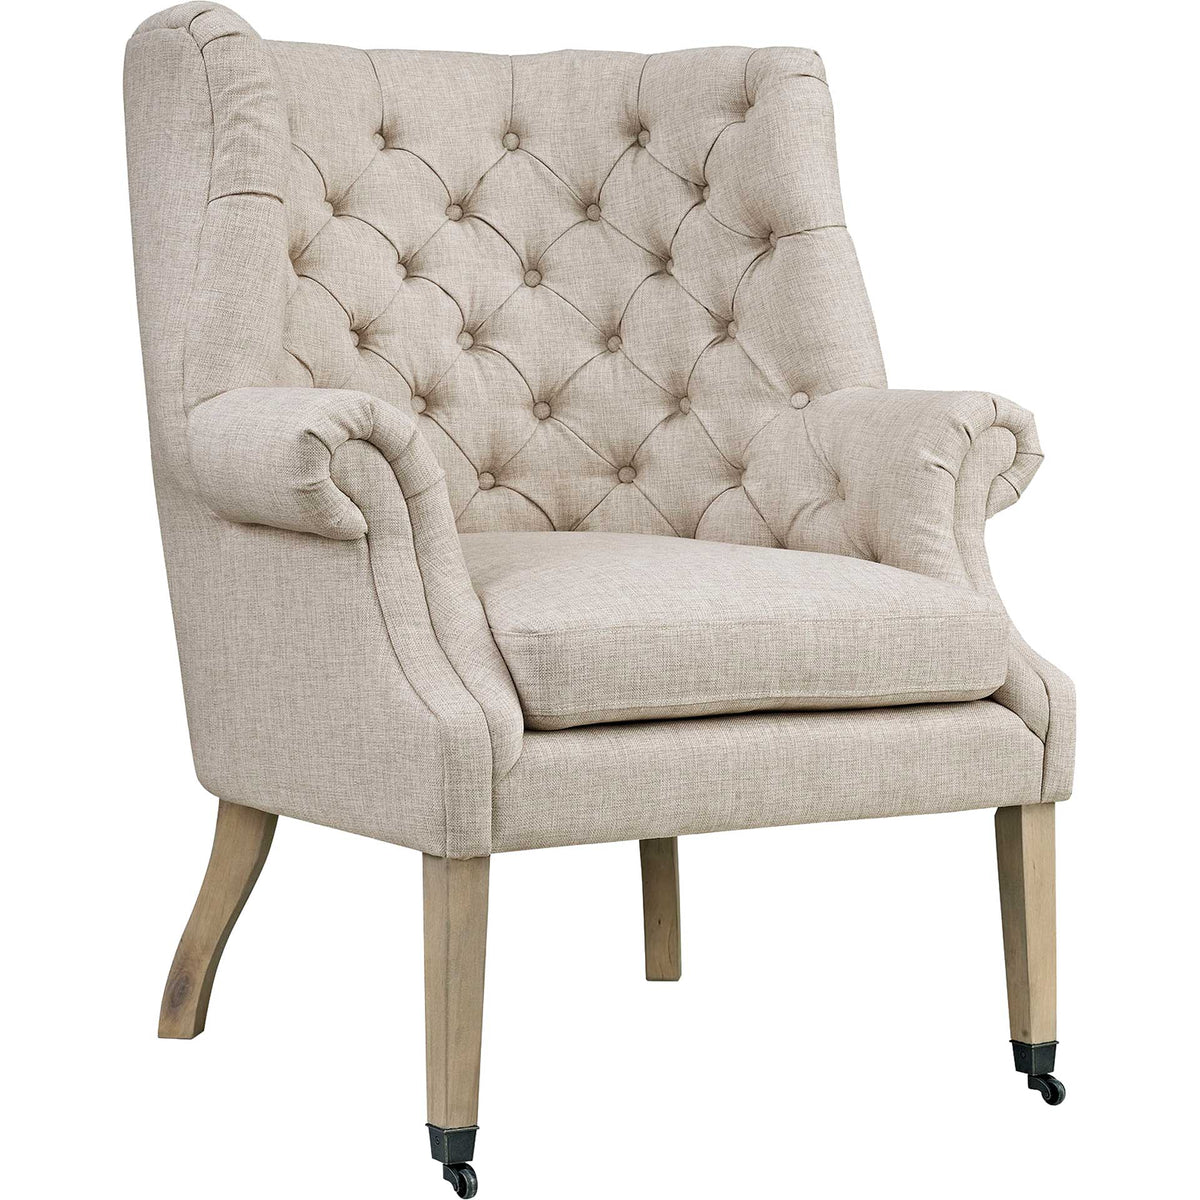 Camron Upholstered Fabric Lounge Chair Sand